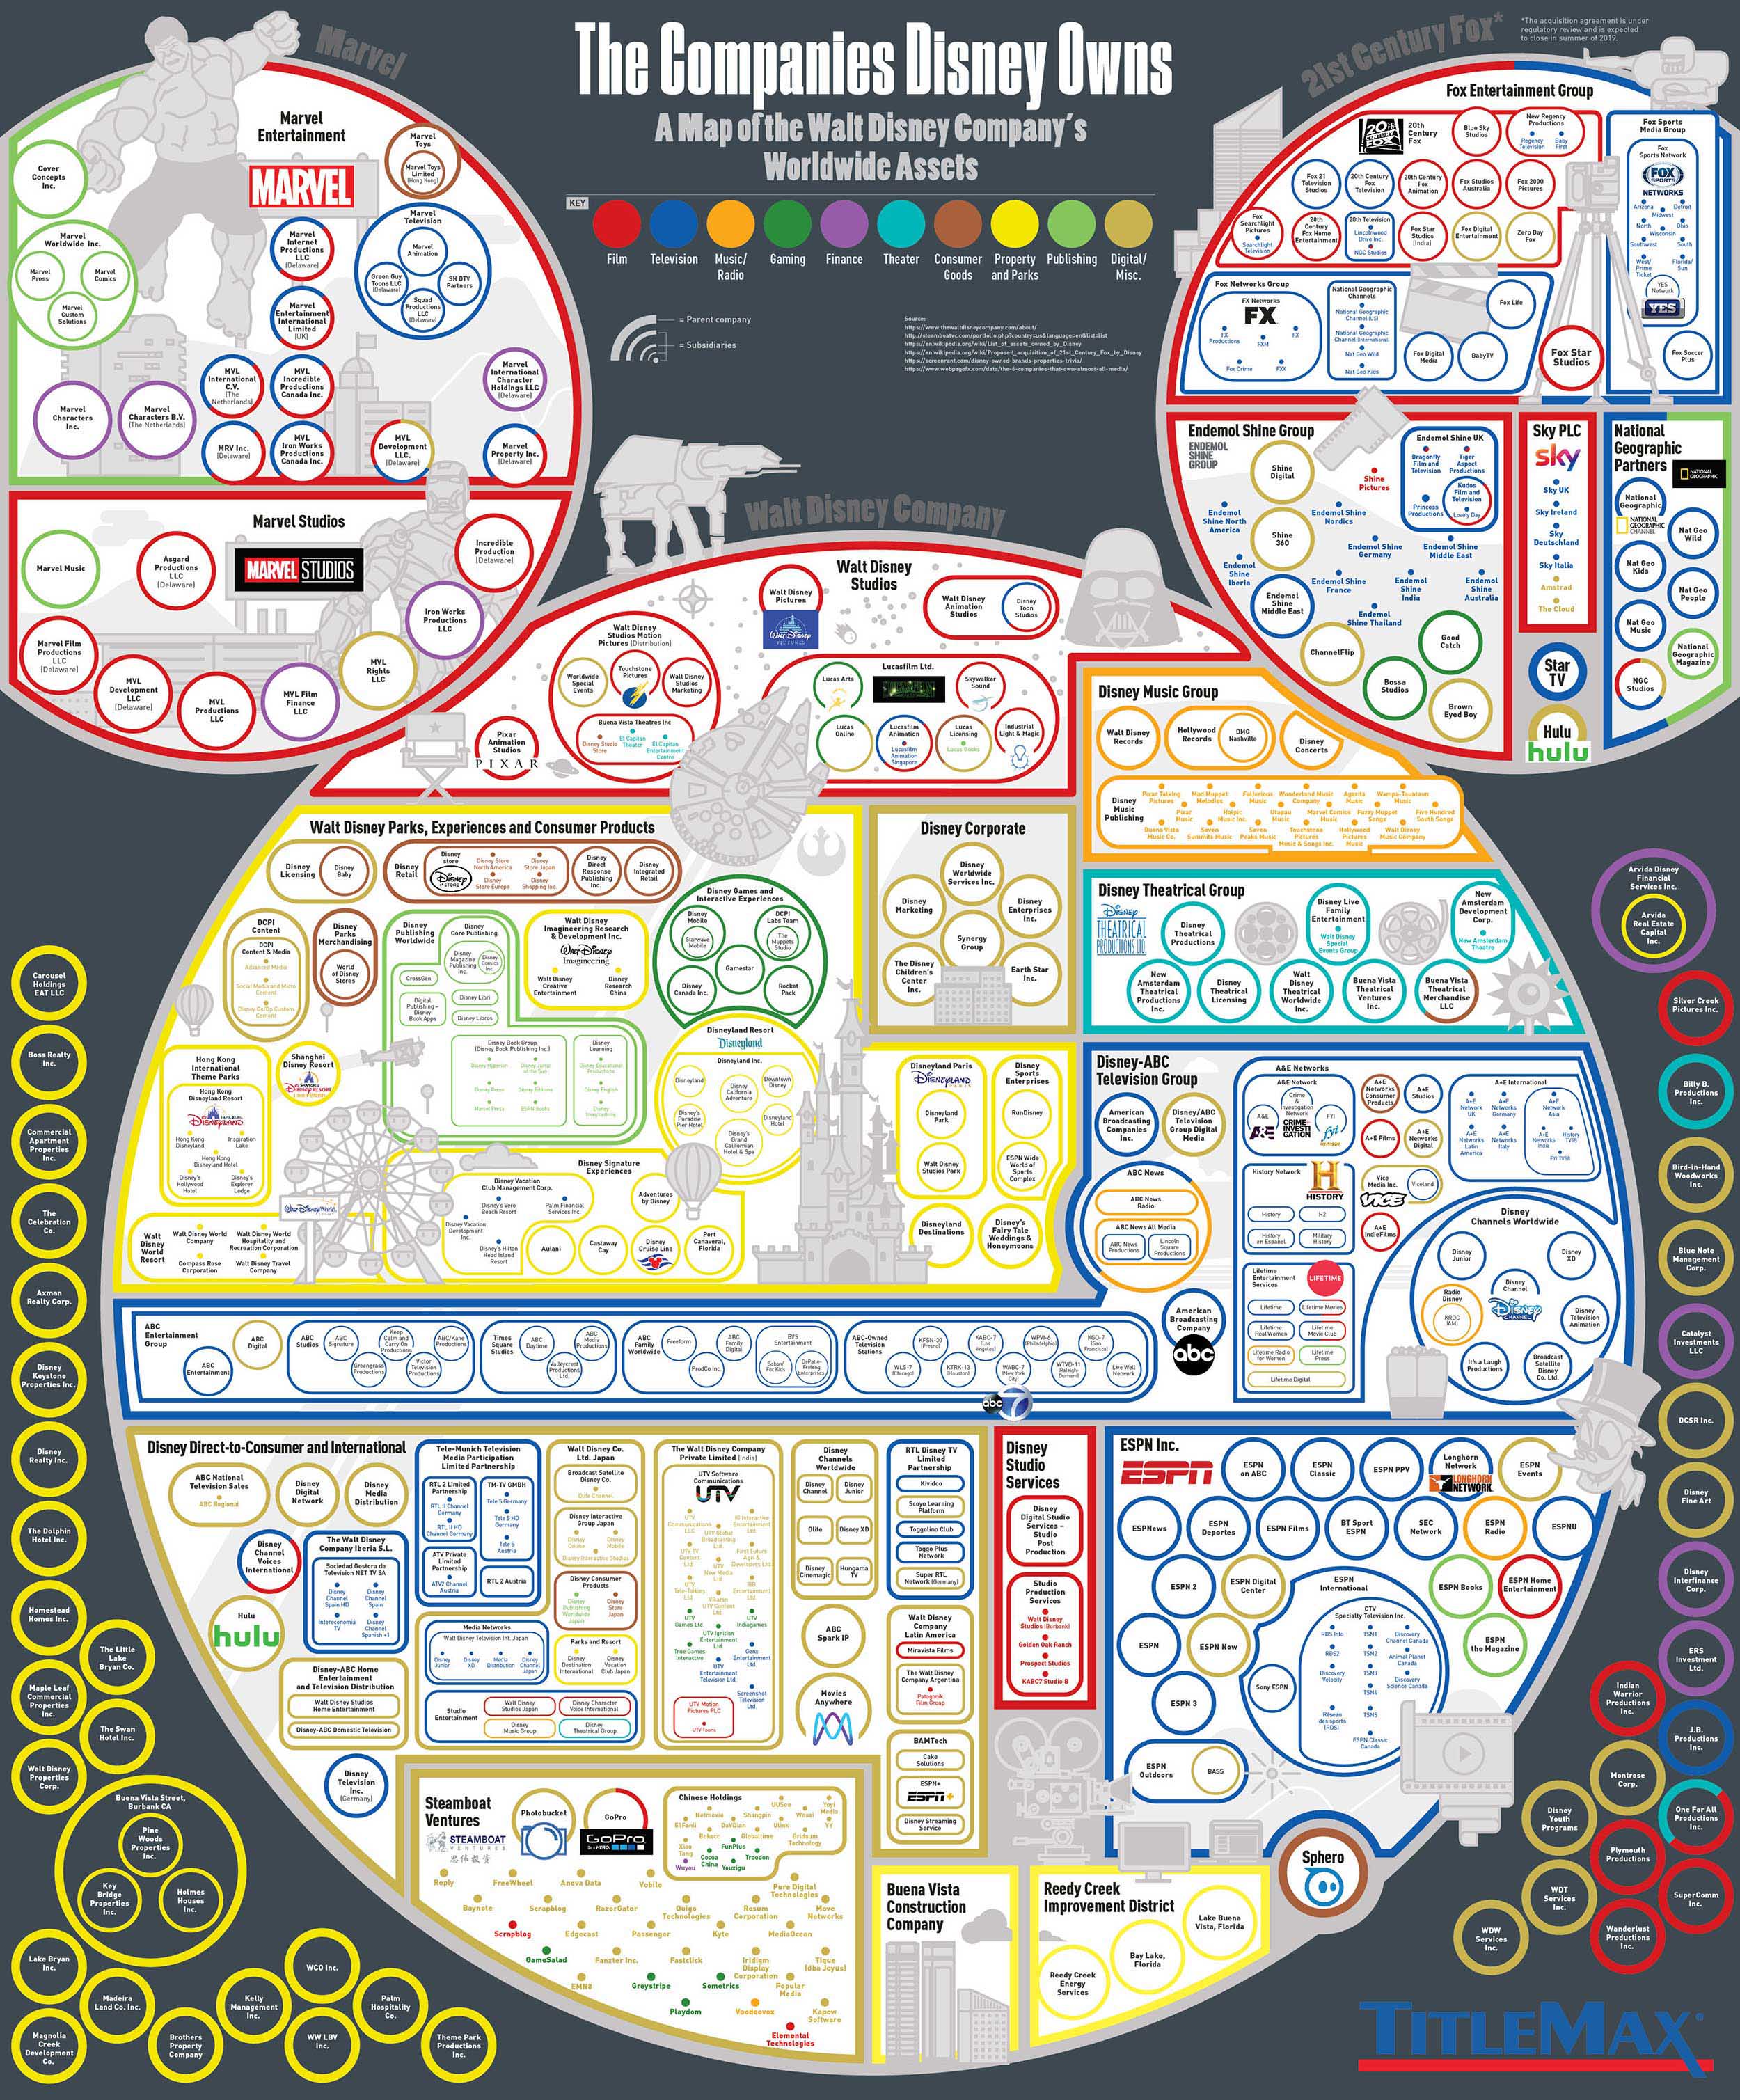 All the Companies Disney Owns